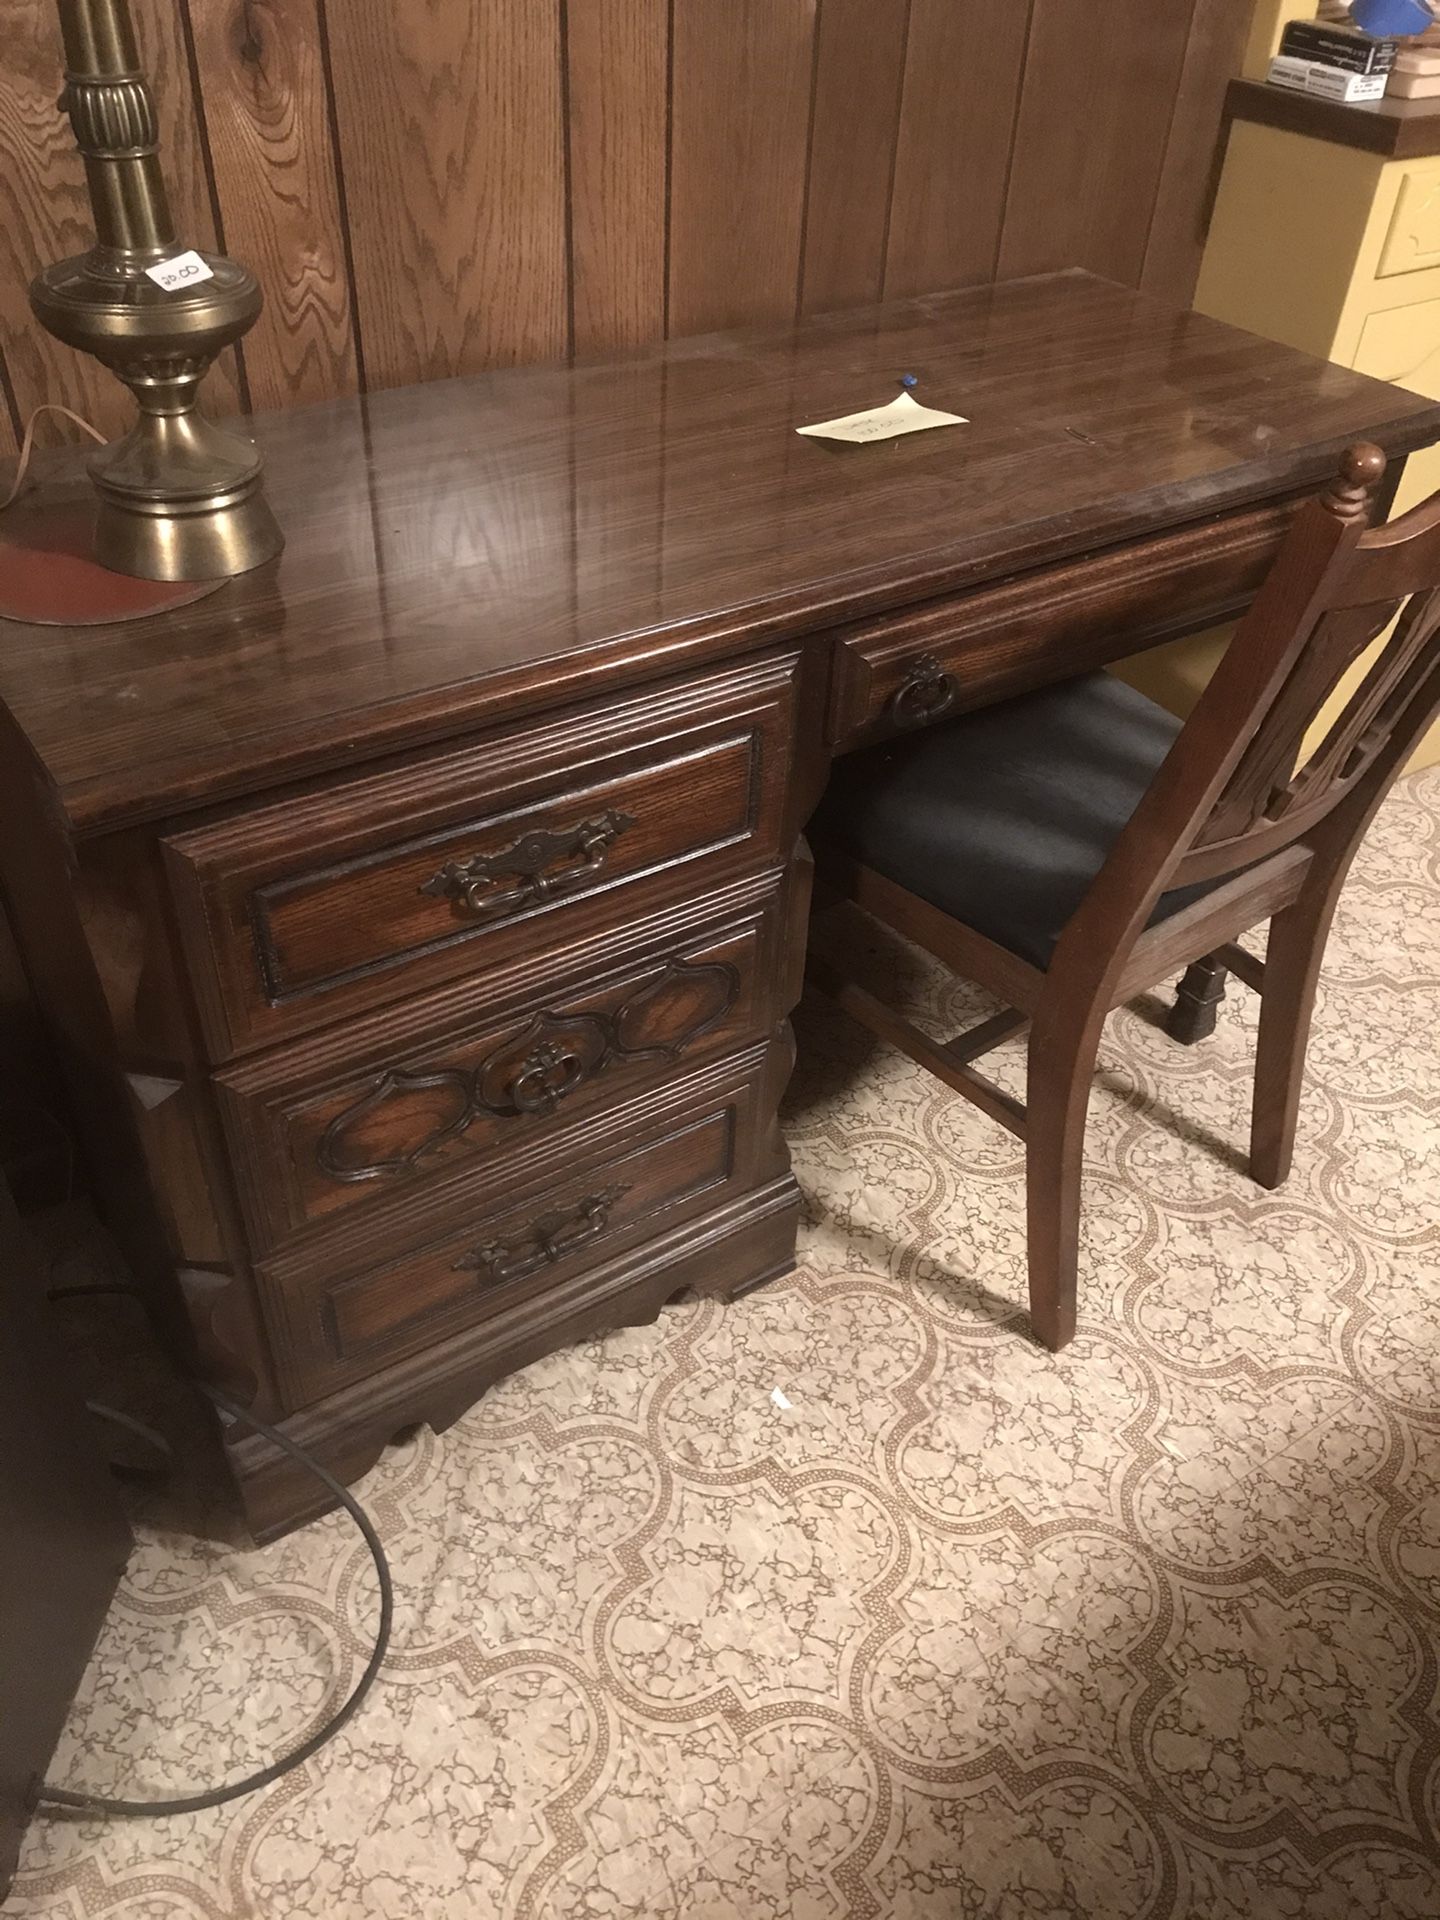 Desk And Chair